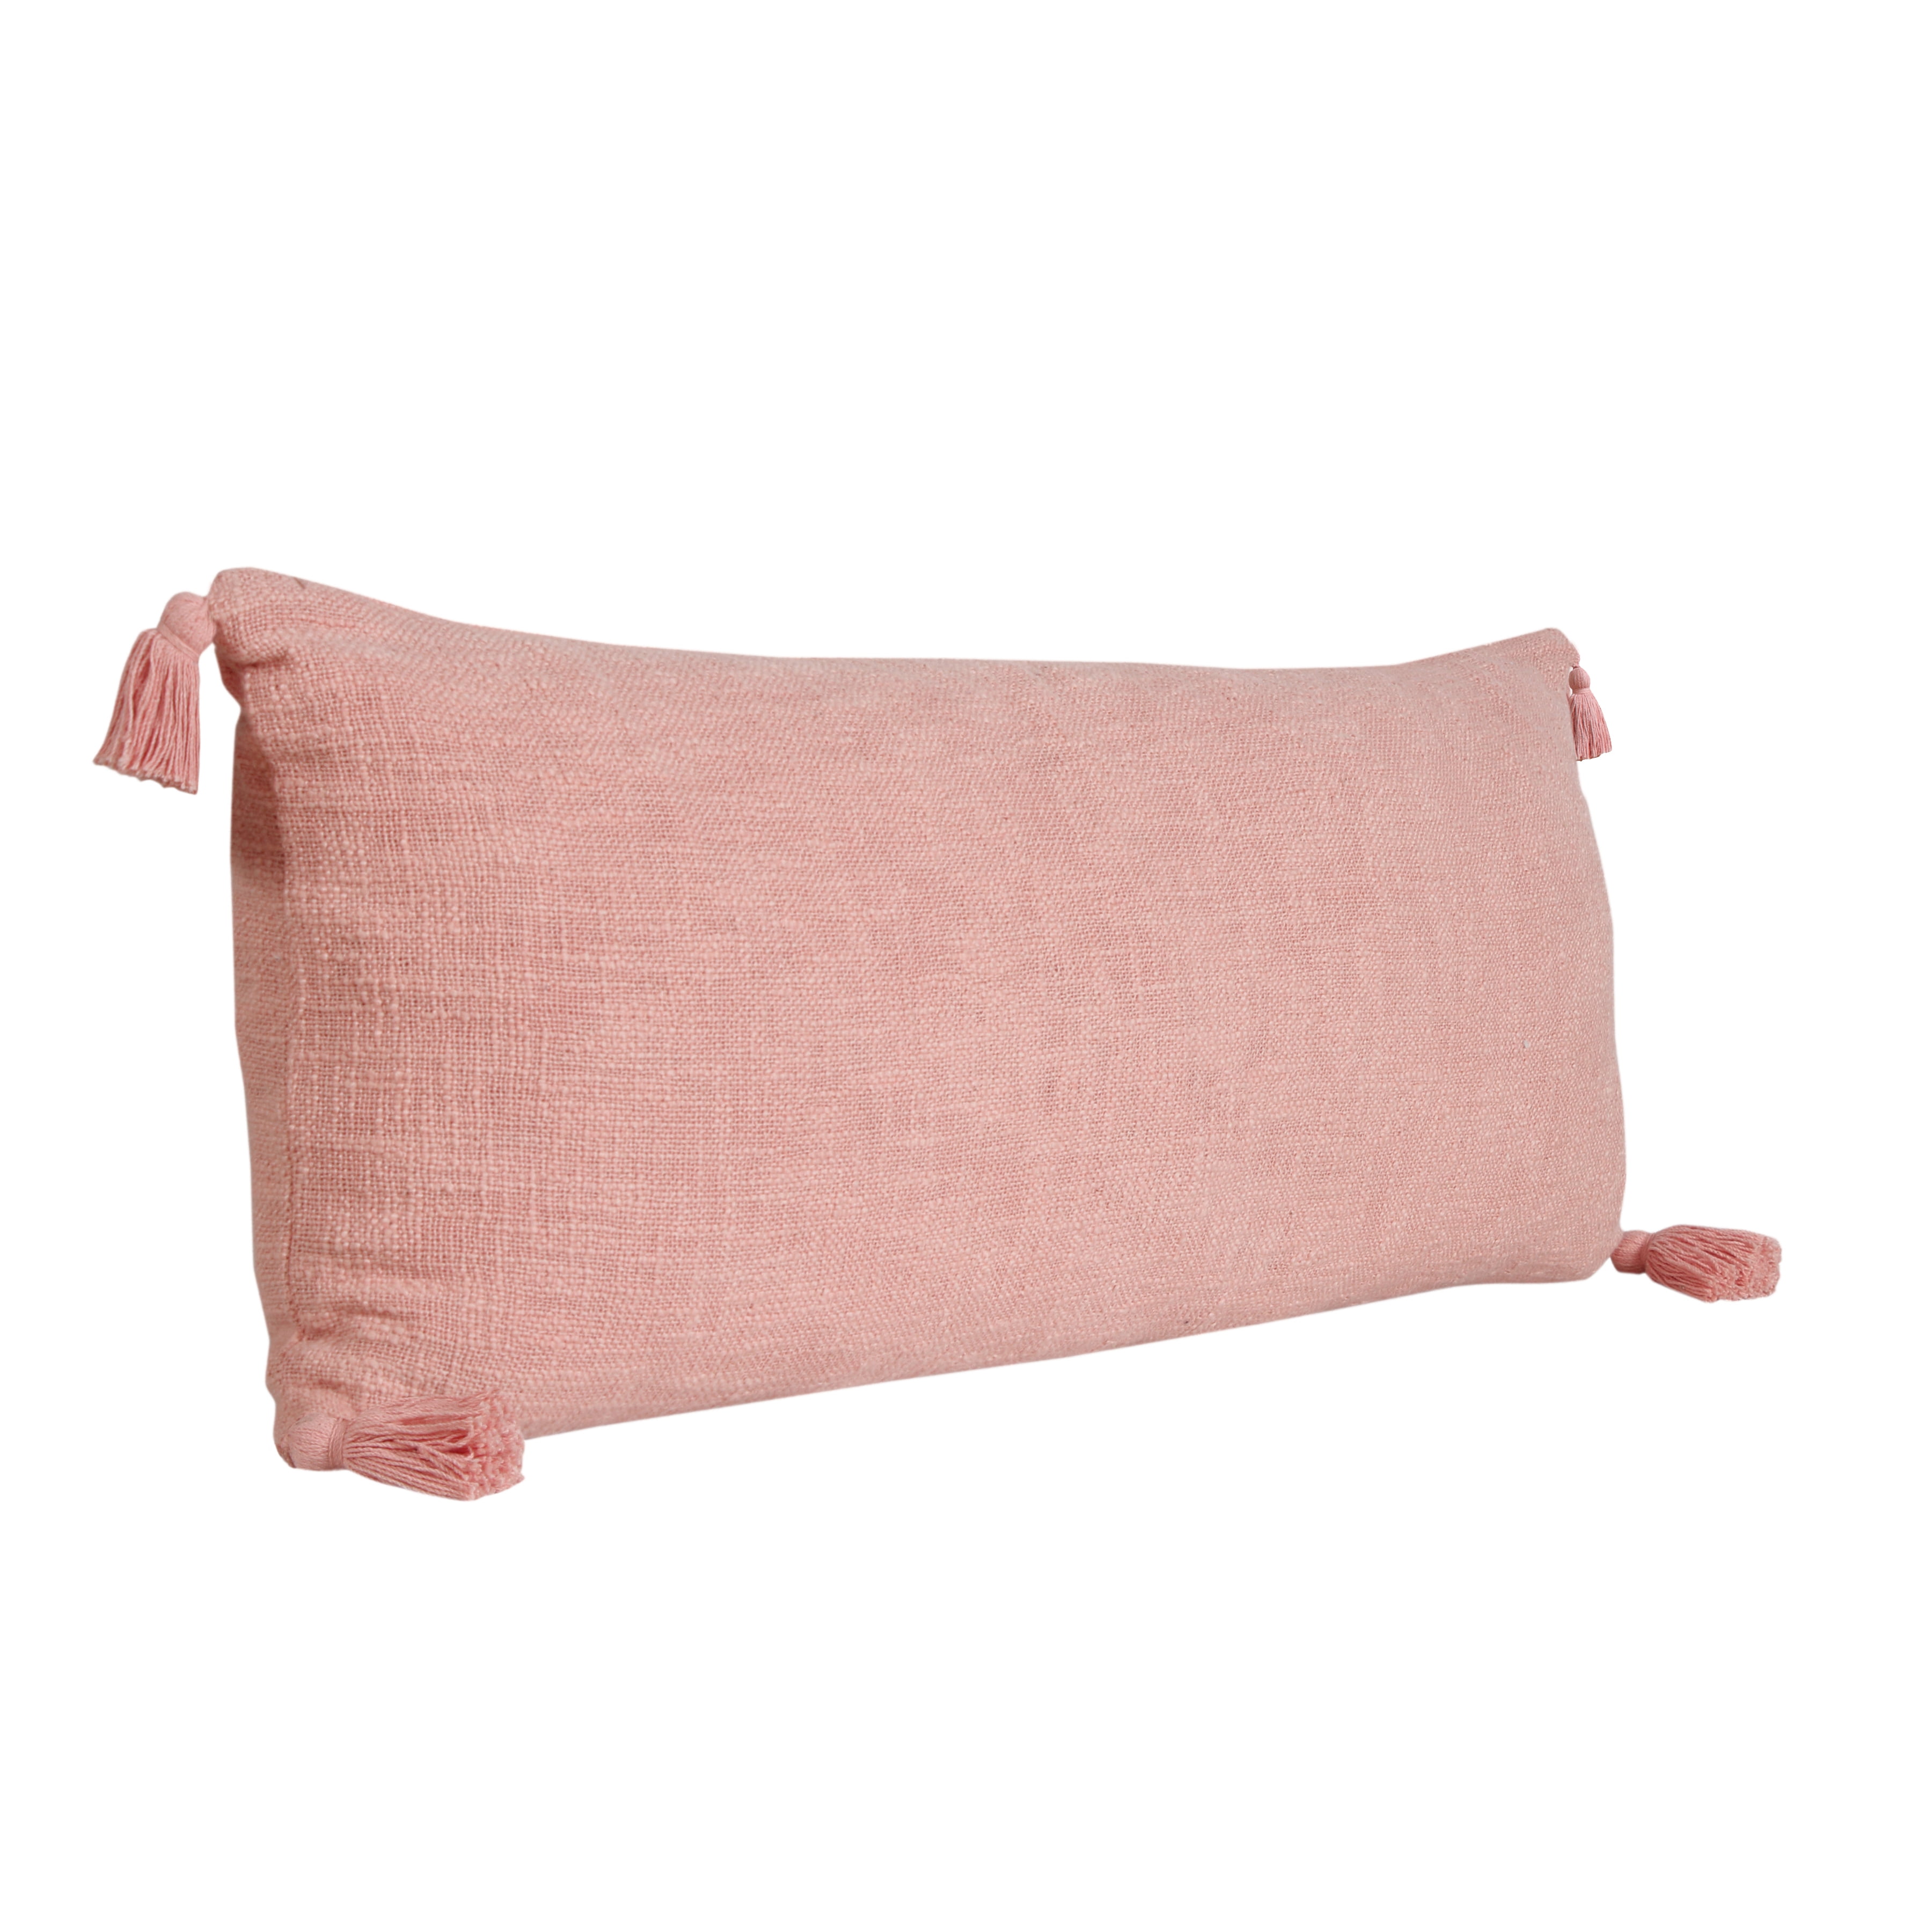 Unique Light Pink 20 in. x 20 in. Neutral Solid Cotton Throw Pillow with  Tassels